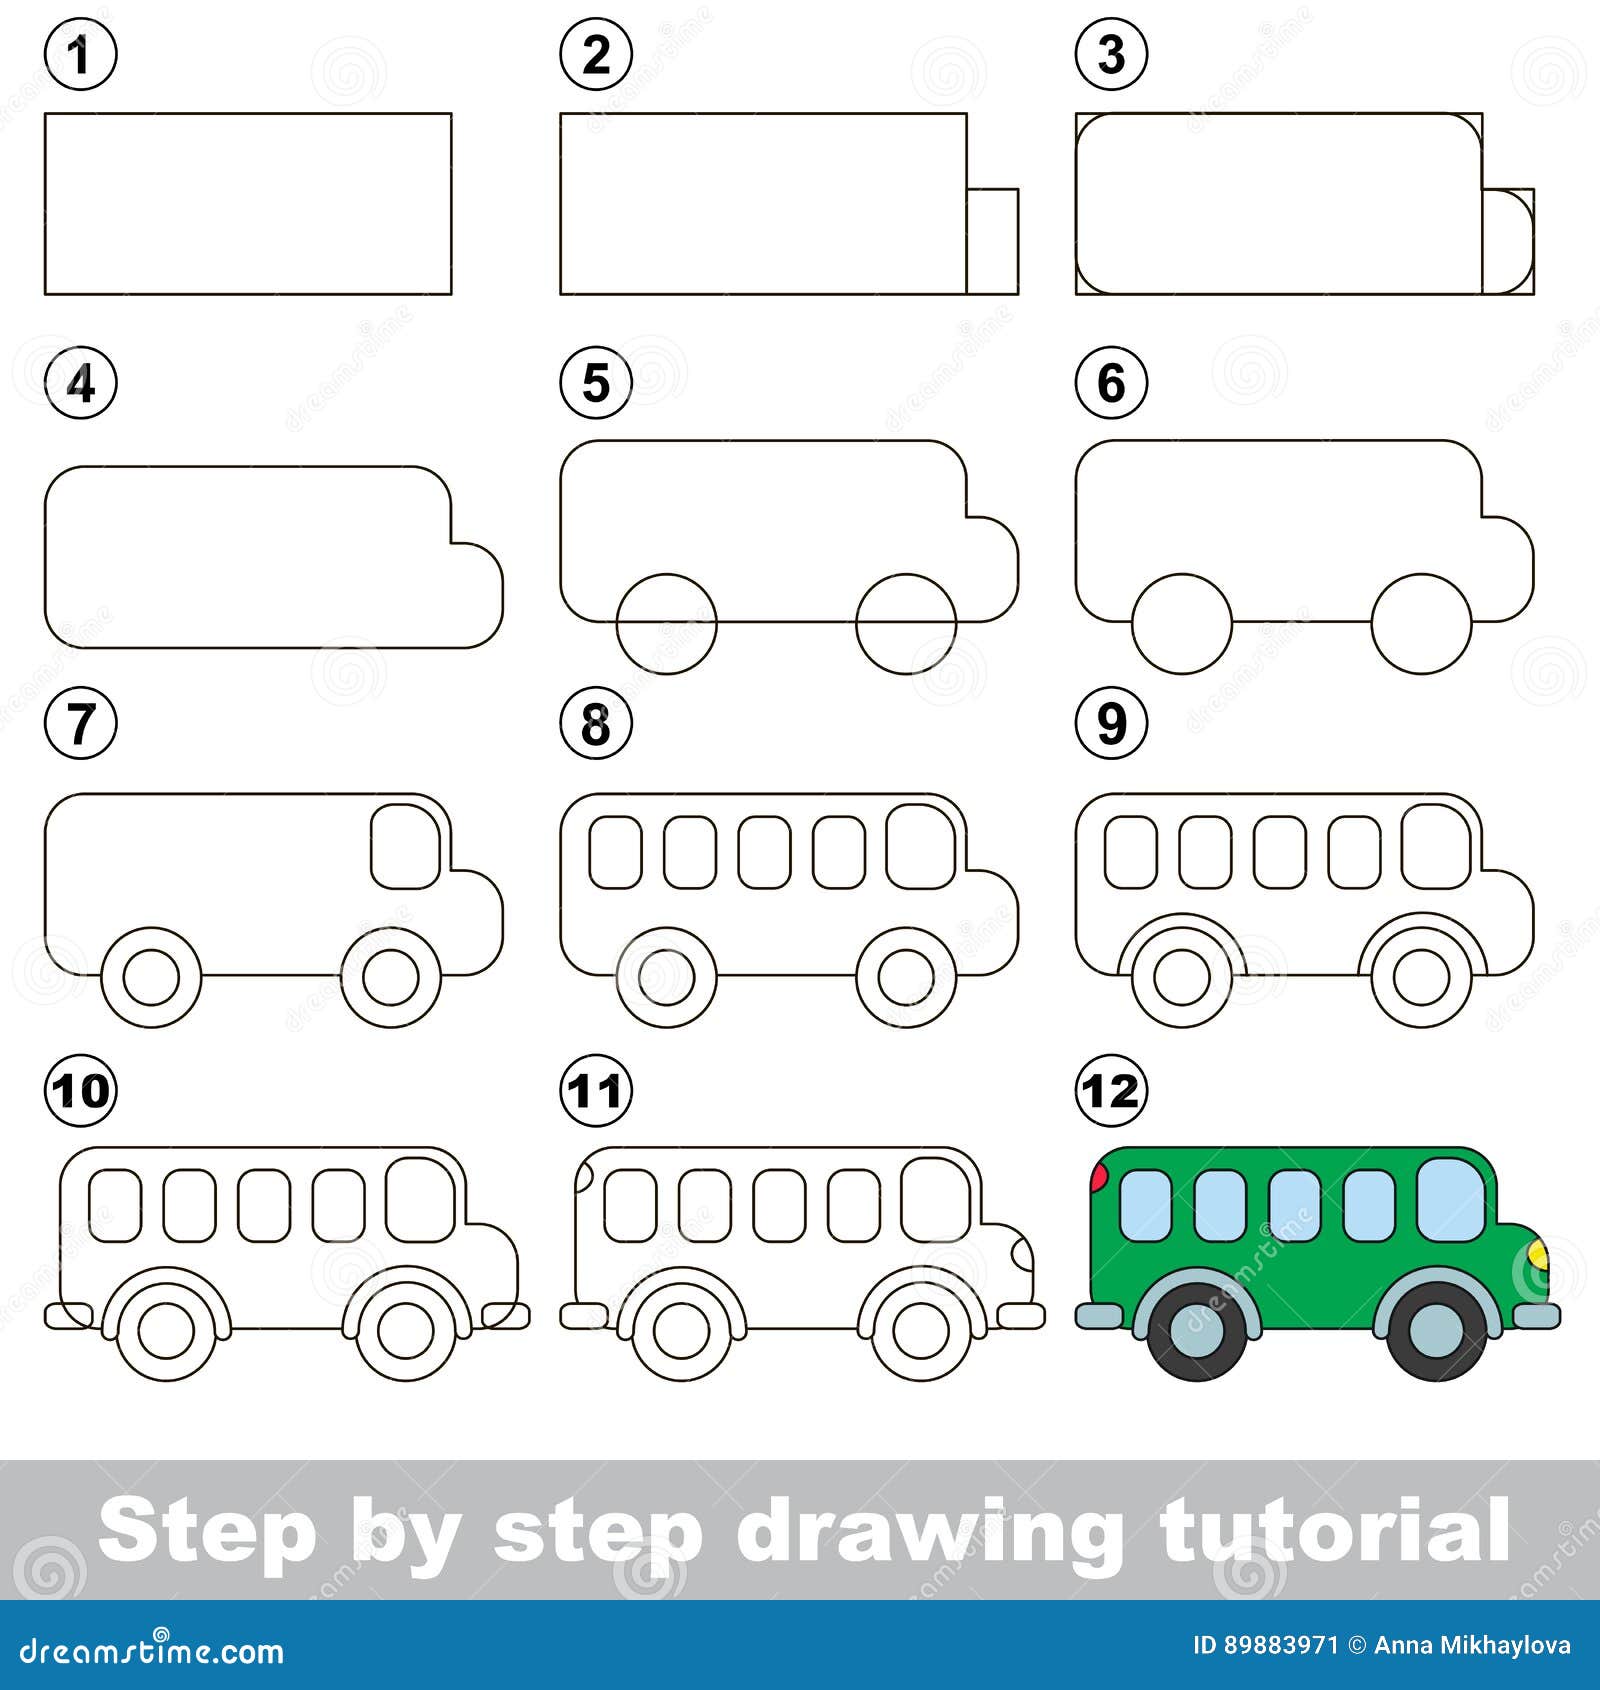 How to Draw a Bus in 12 Easy Steps - VerbNow